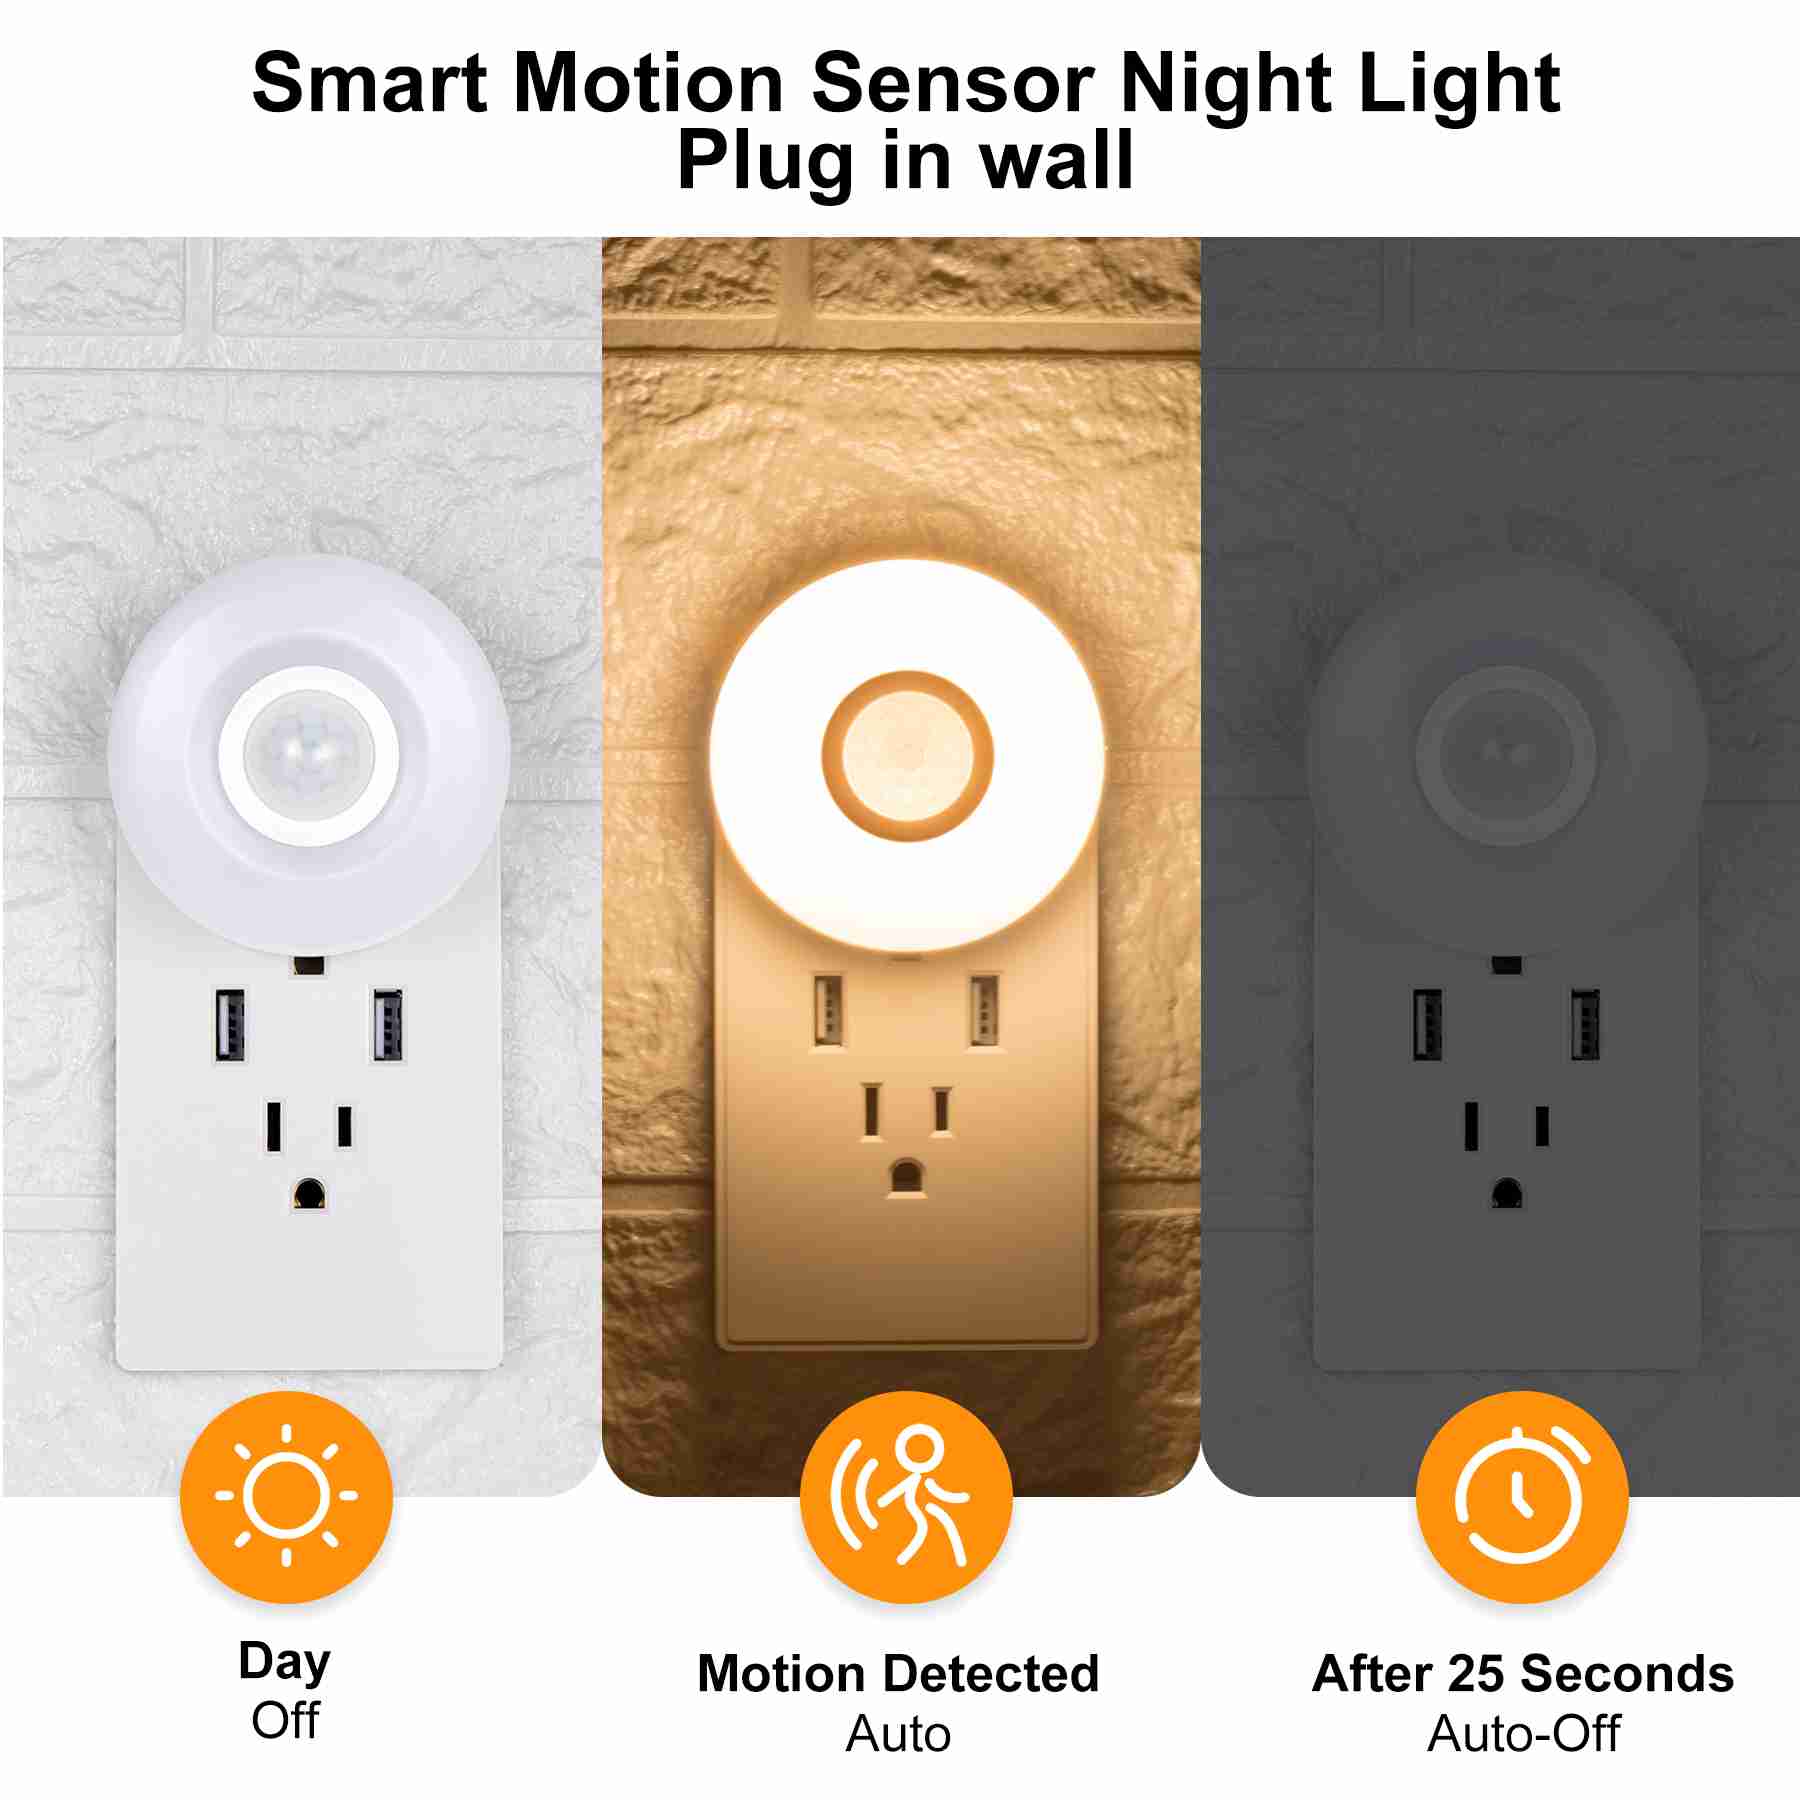 motion-sensor-night-light-plug-in-wall with discount code